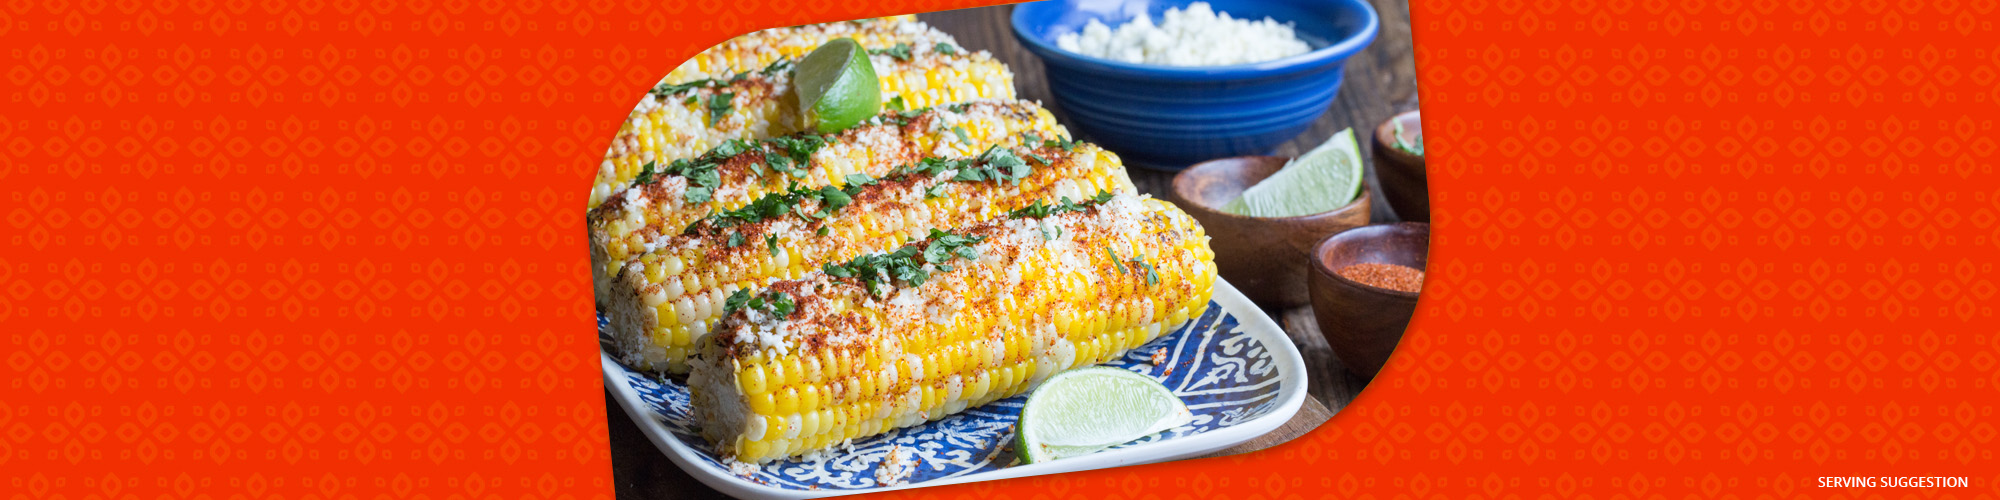 Salsas grilled corn on the cob